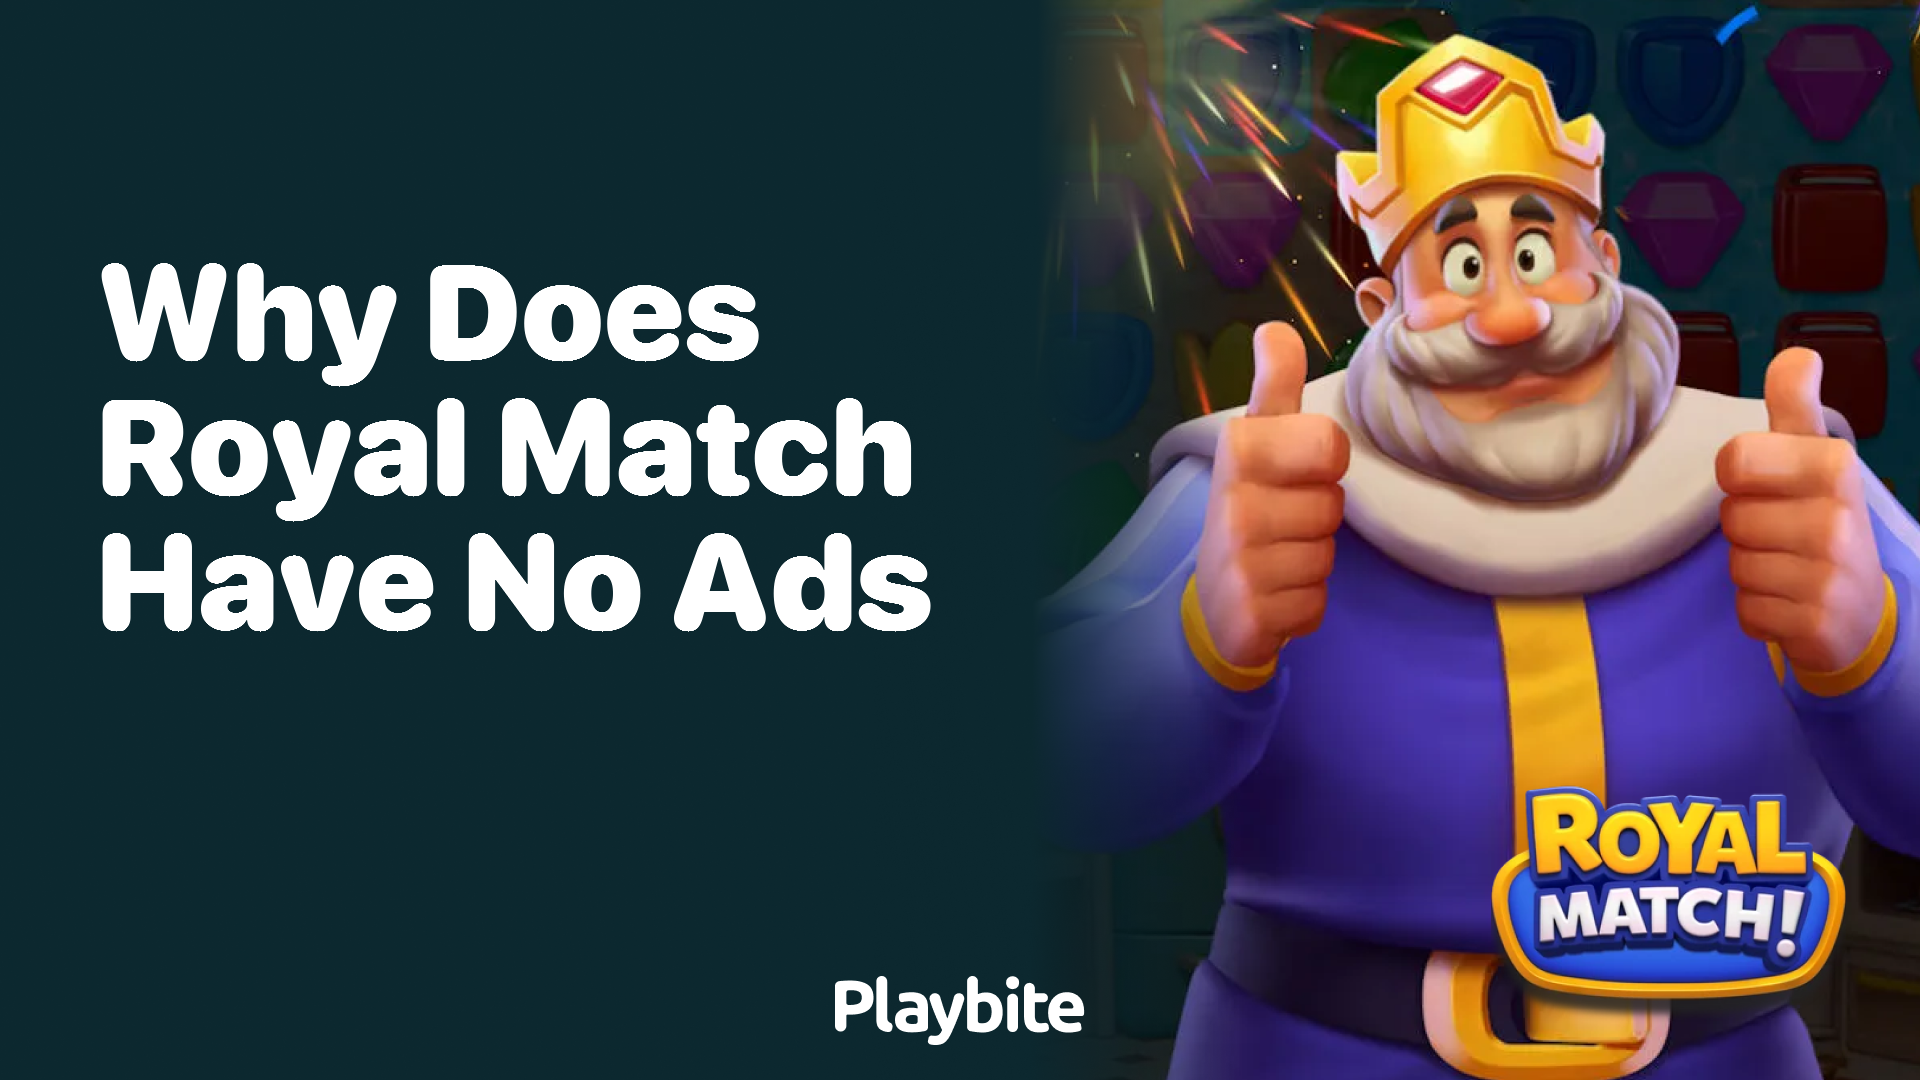 Why Does Royal Match Have No Ads?